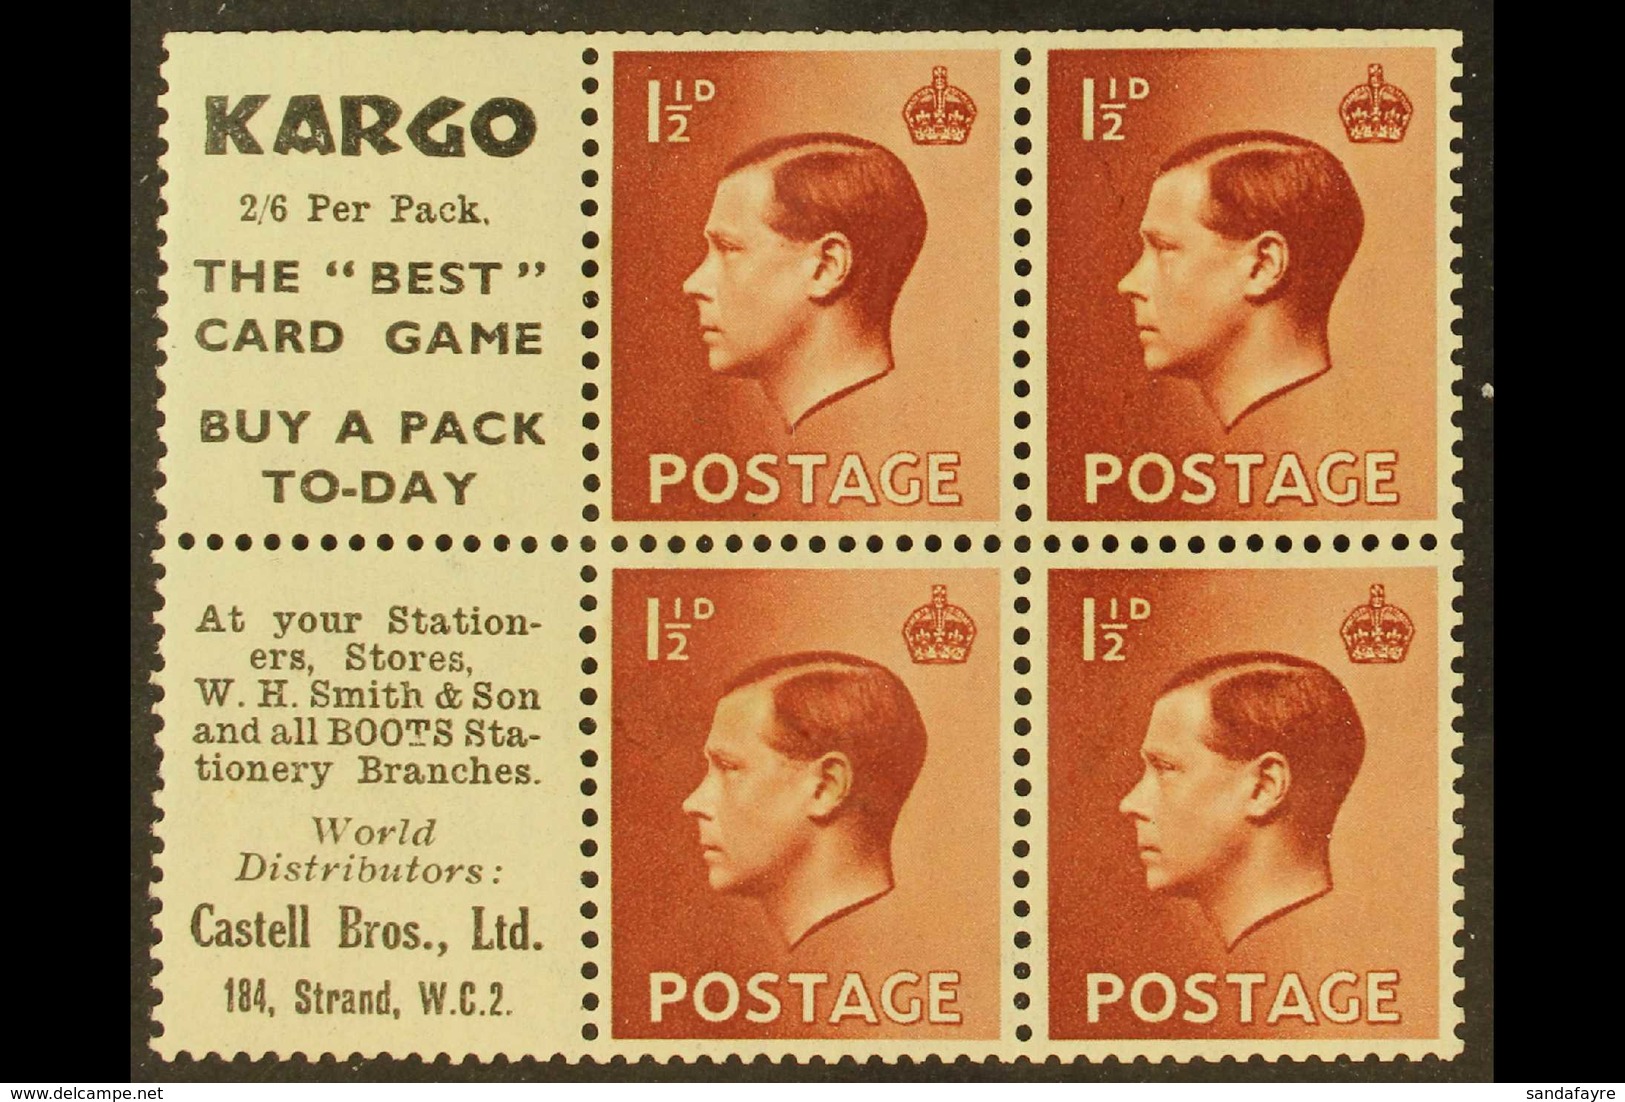 BOOKLET PANES WITH ADVERTISING LABELS 1½d Red Brown Booklet Panes Of 4 With 2 Advertising Labels (KARGO),  SG Spec. PB5  - Unclassified